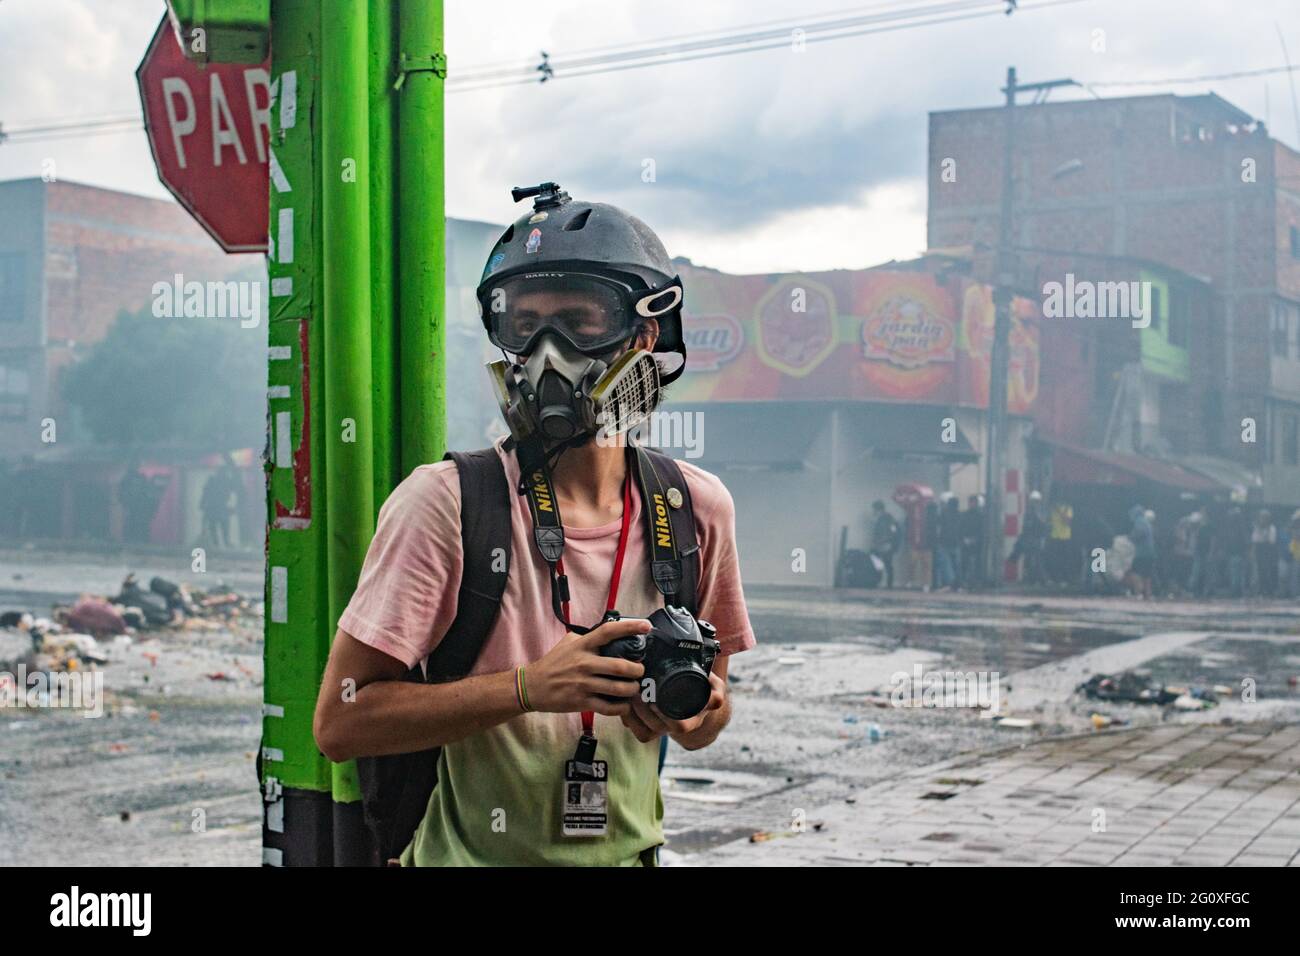 June 2, 2021, Medellin, Antioquia, Colombia: A member of the press using a gas mask and a helmet during clashes with Colombia's riot police ESMAD as anti-government protests rise into a 5th week against the government of president Ivan Duque's health and tax reform, and police abuse of authority cases in Medellin, Colombia on June 2, 2021. (Credit Image: © Miyer Juana/LongVisual via ZUMA Wire) Stock Photo